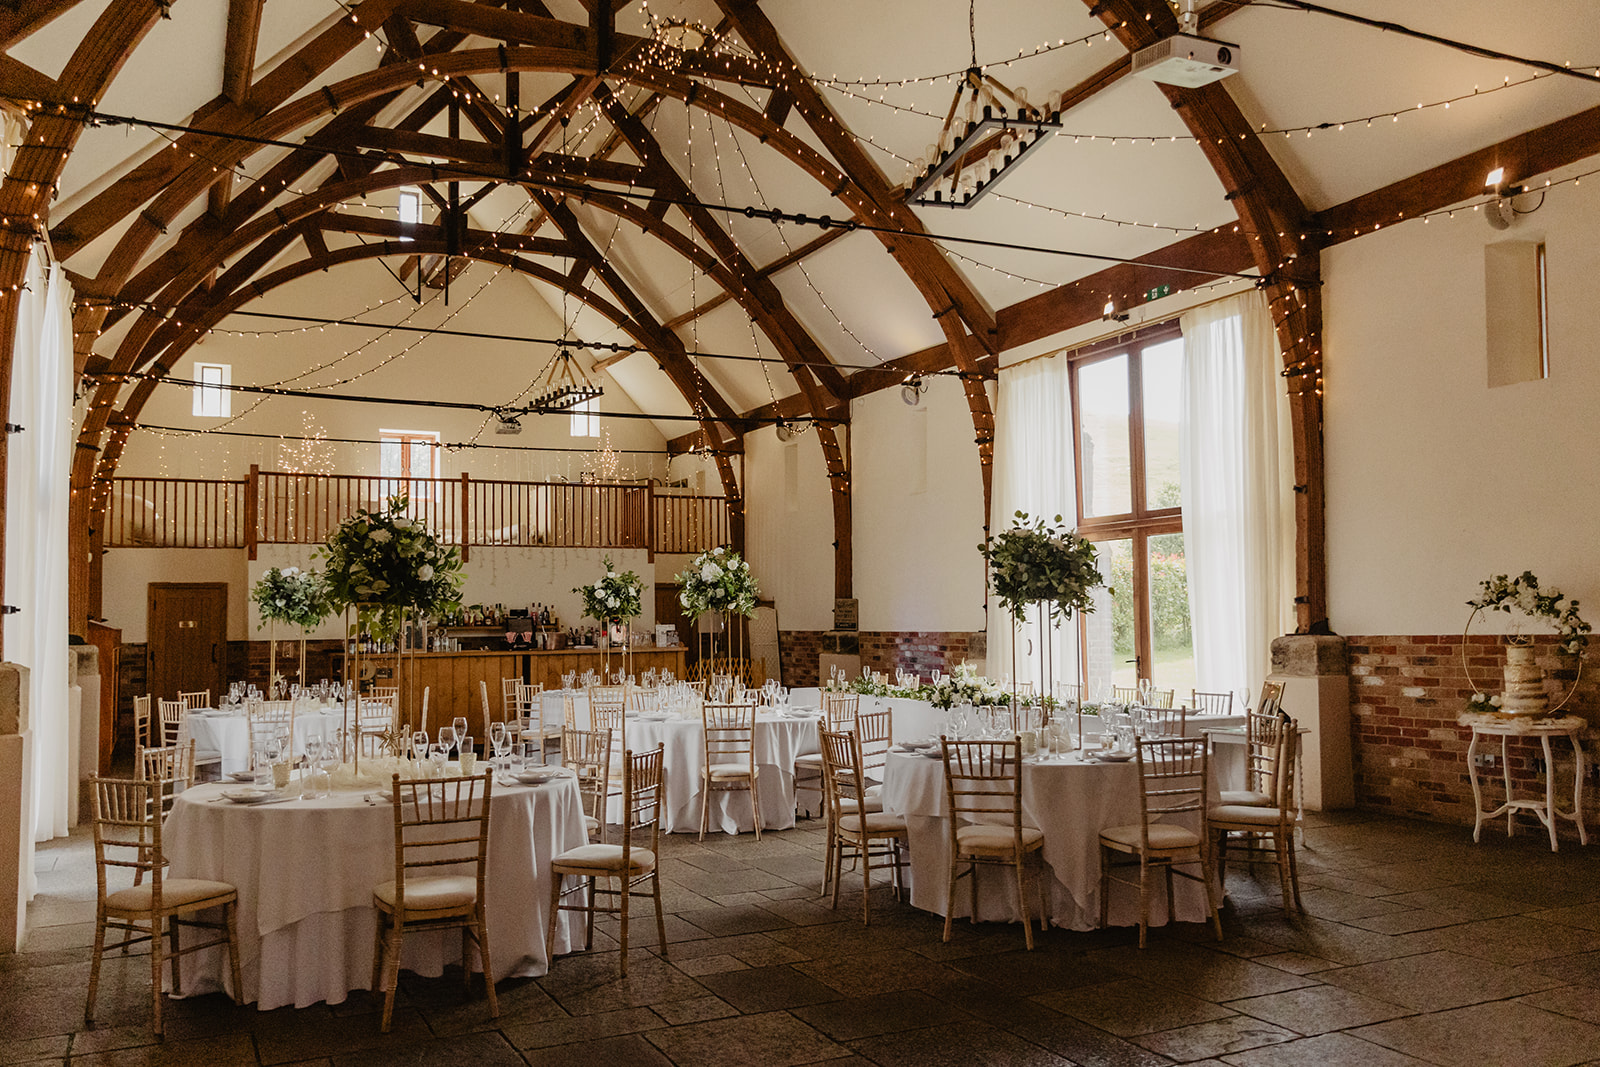 Reception at a Long Furlong Barn Wedding in Worthing, Sussex. By Olive Joy Photography.